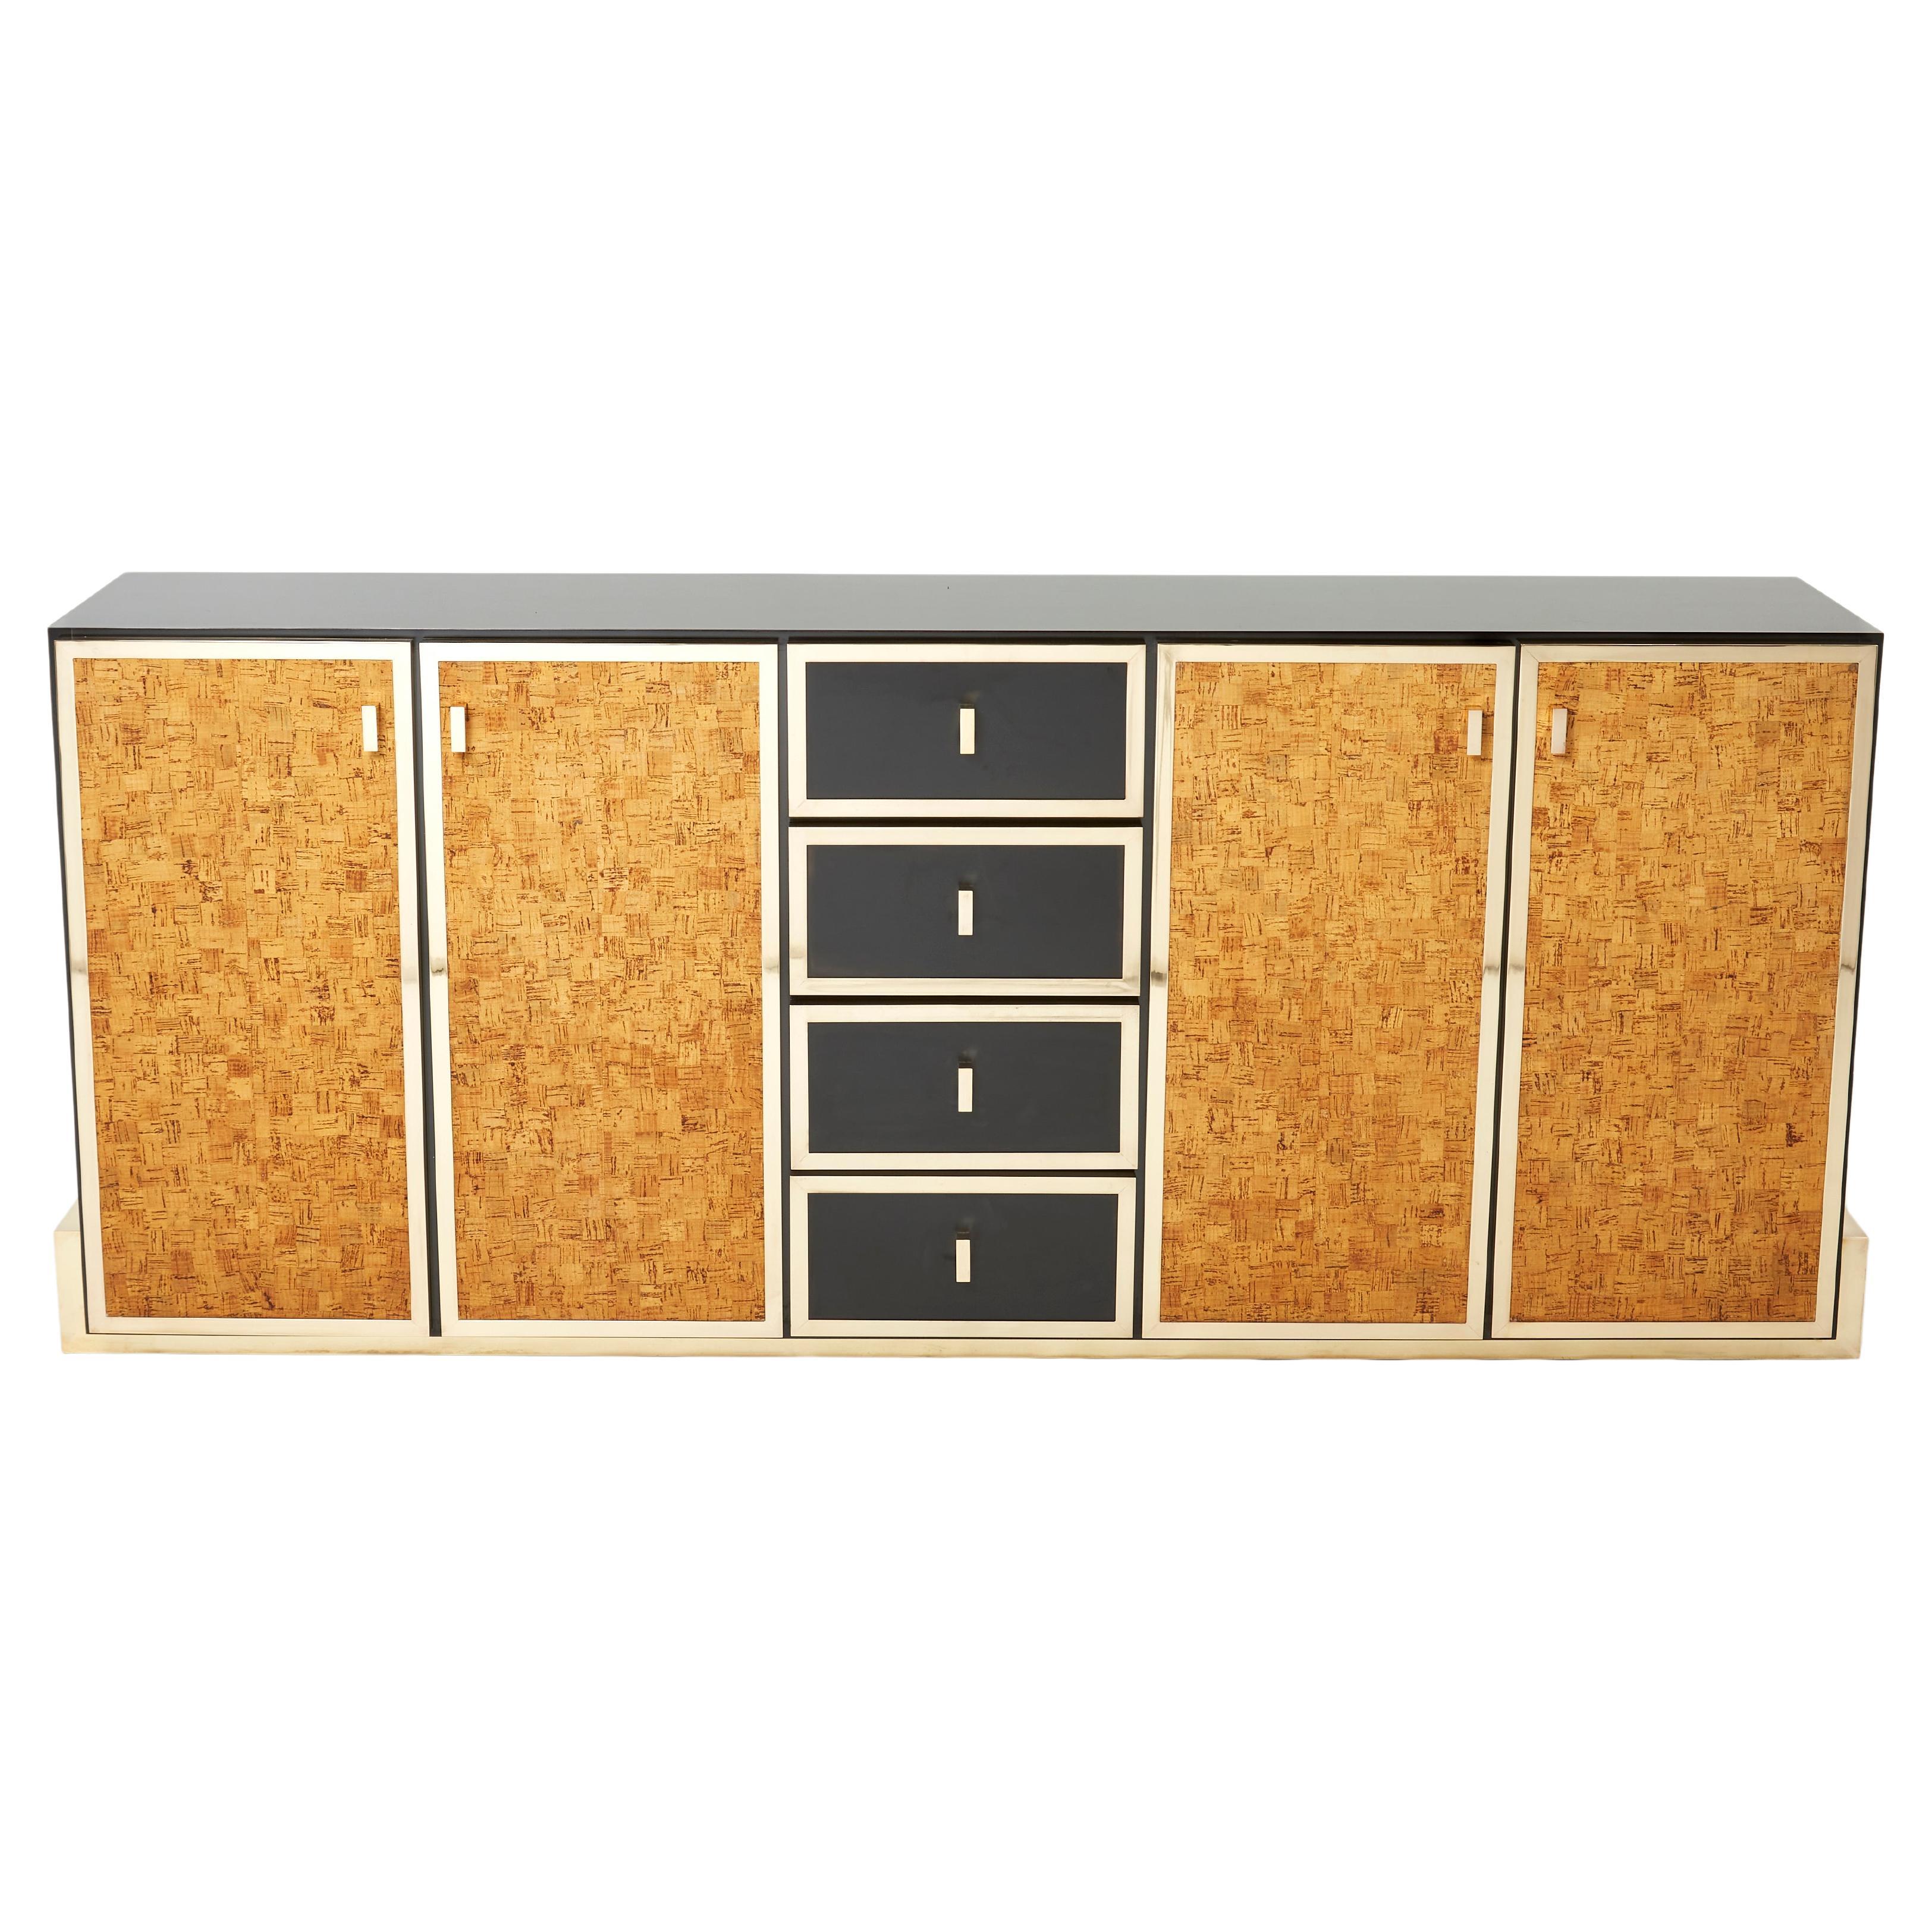 Italian Brass and Cork Marquetry Sideboard 1970s For Sale